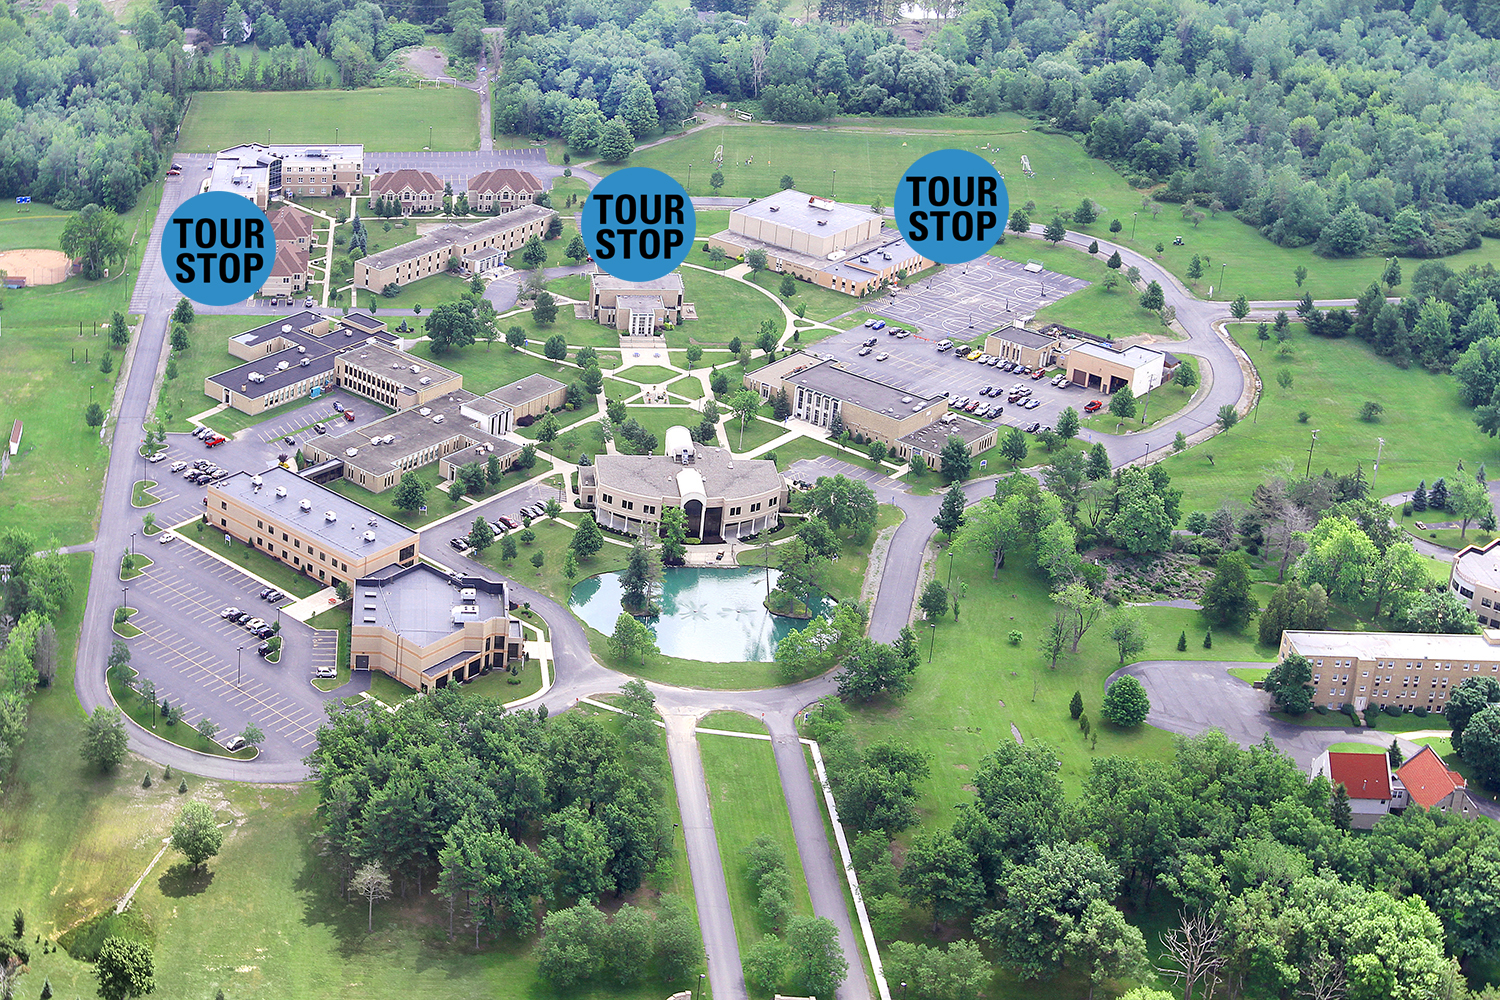 Aerial View of Hilbert College with Blue Tour Stop Symbols at The Campus Center, The Residence Halls, and Hafner Recreation Center